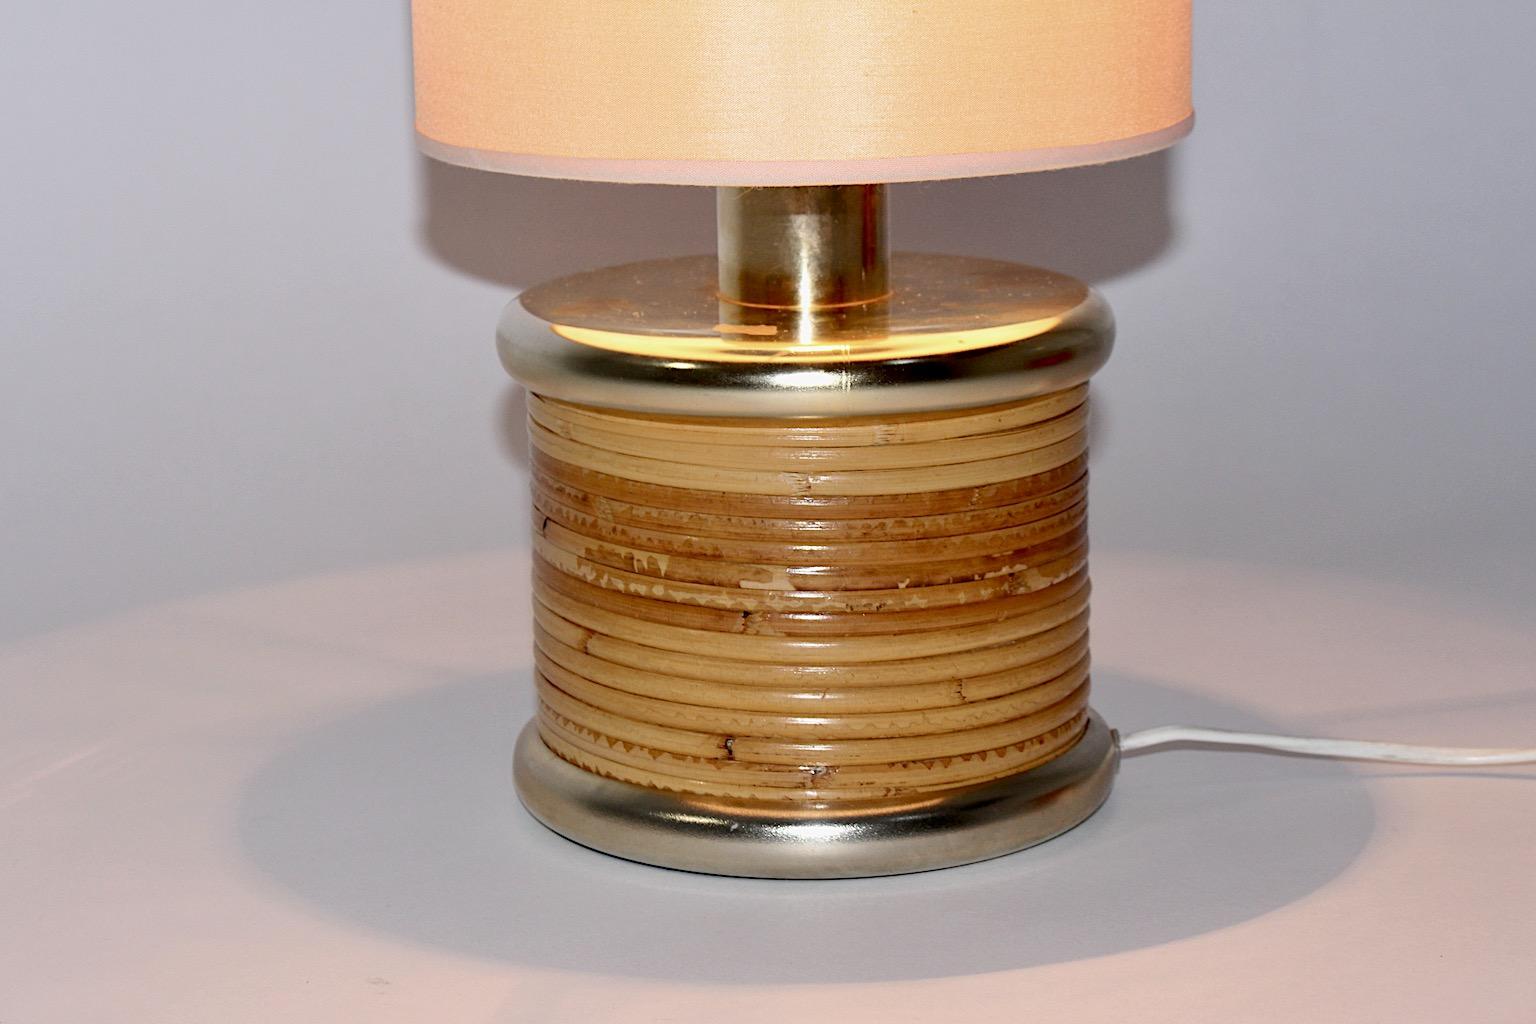 Organic Modern Vintage Golden Circular Rattan Brass Table Lamp Italy 1970s For Sale 1